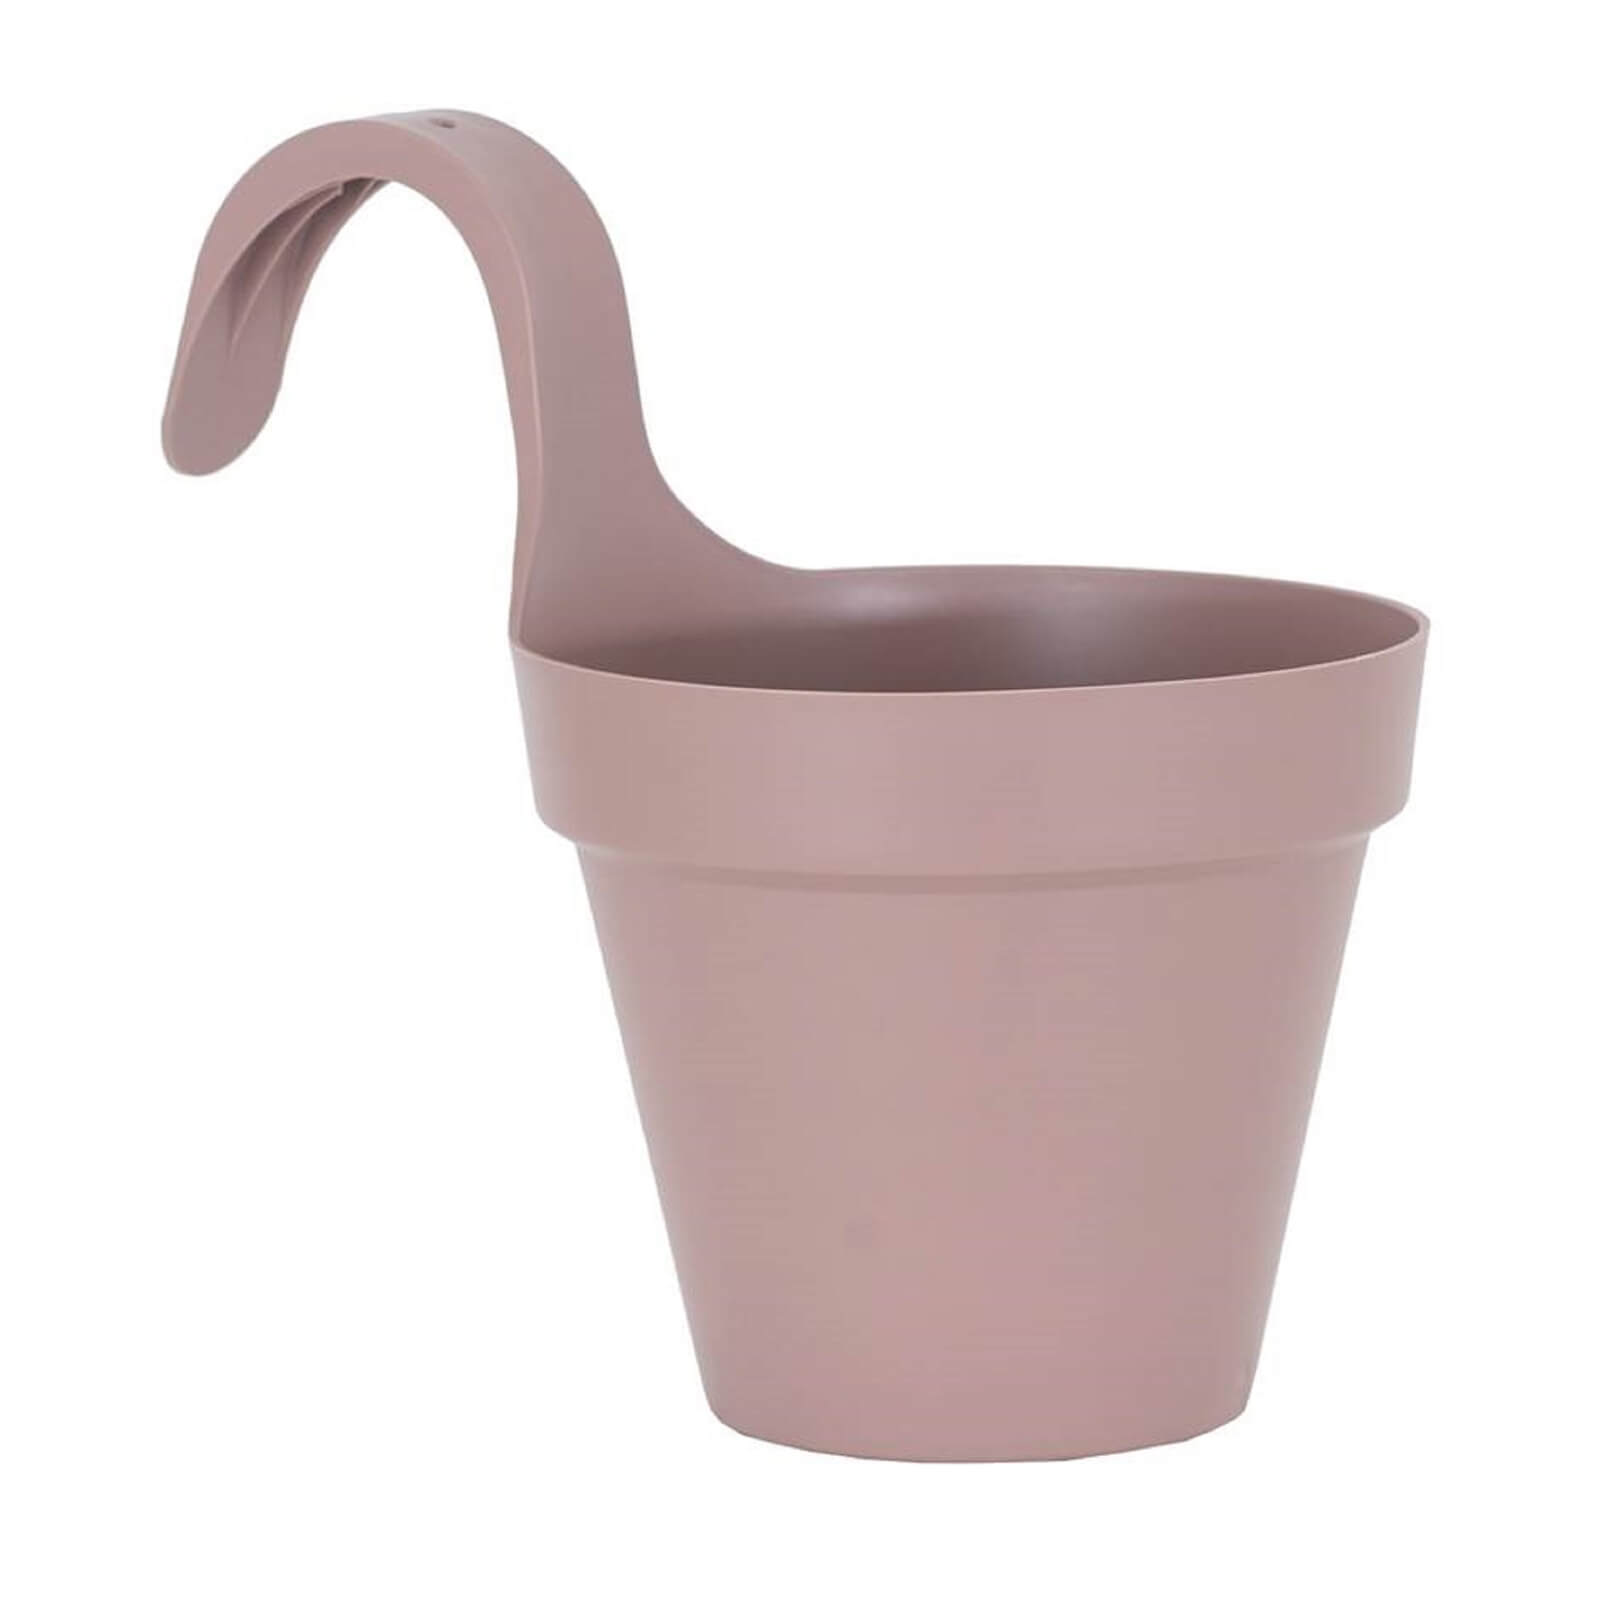 Balcony Hook Pot in Taupe - 20cm